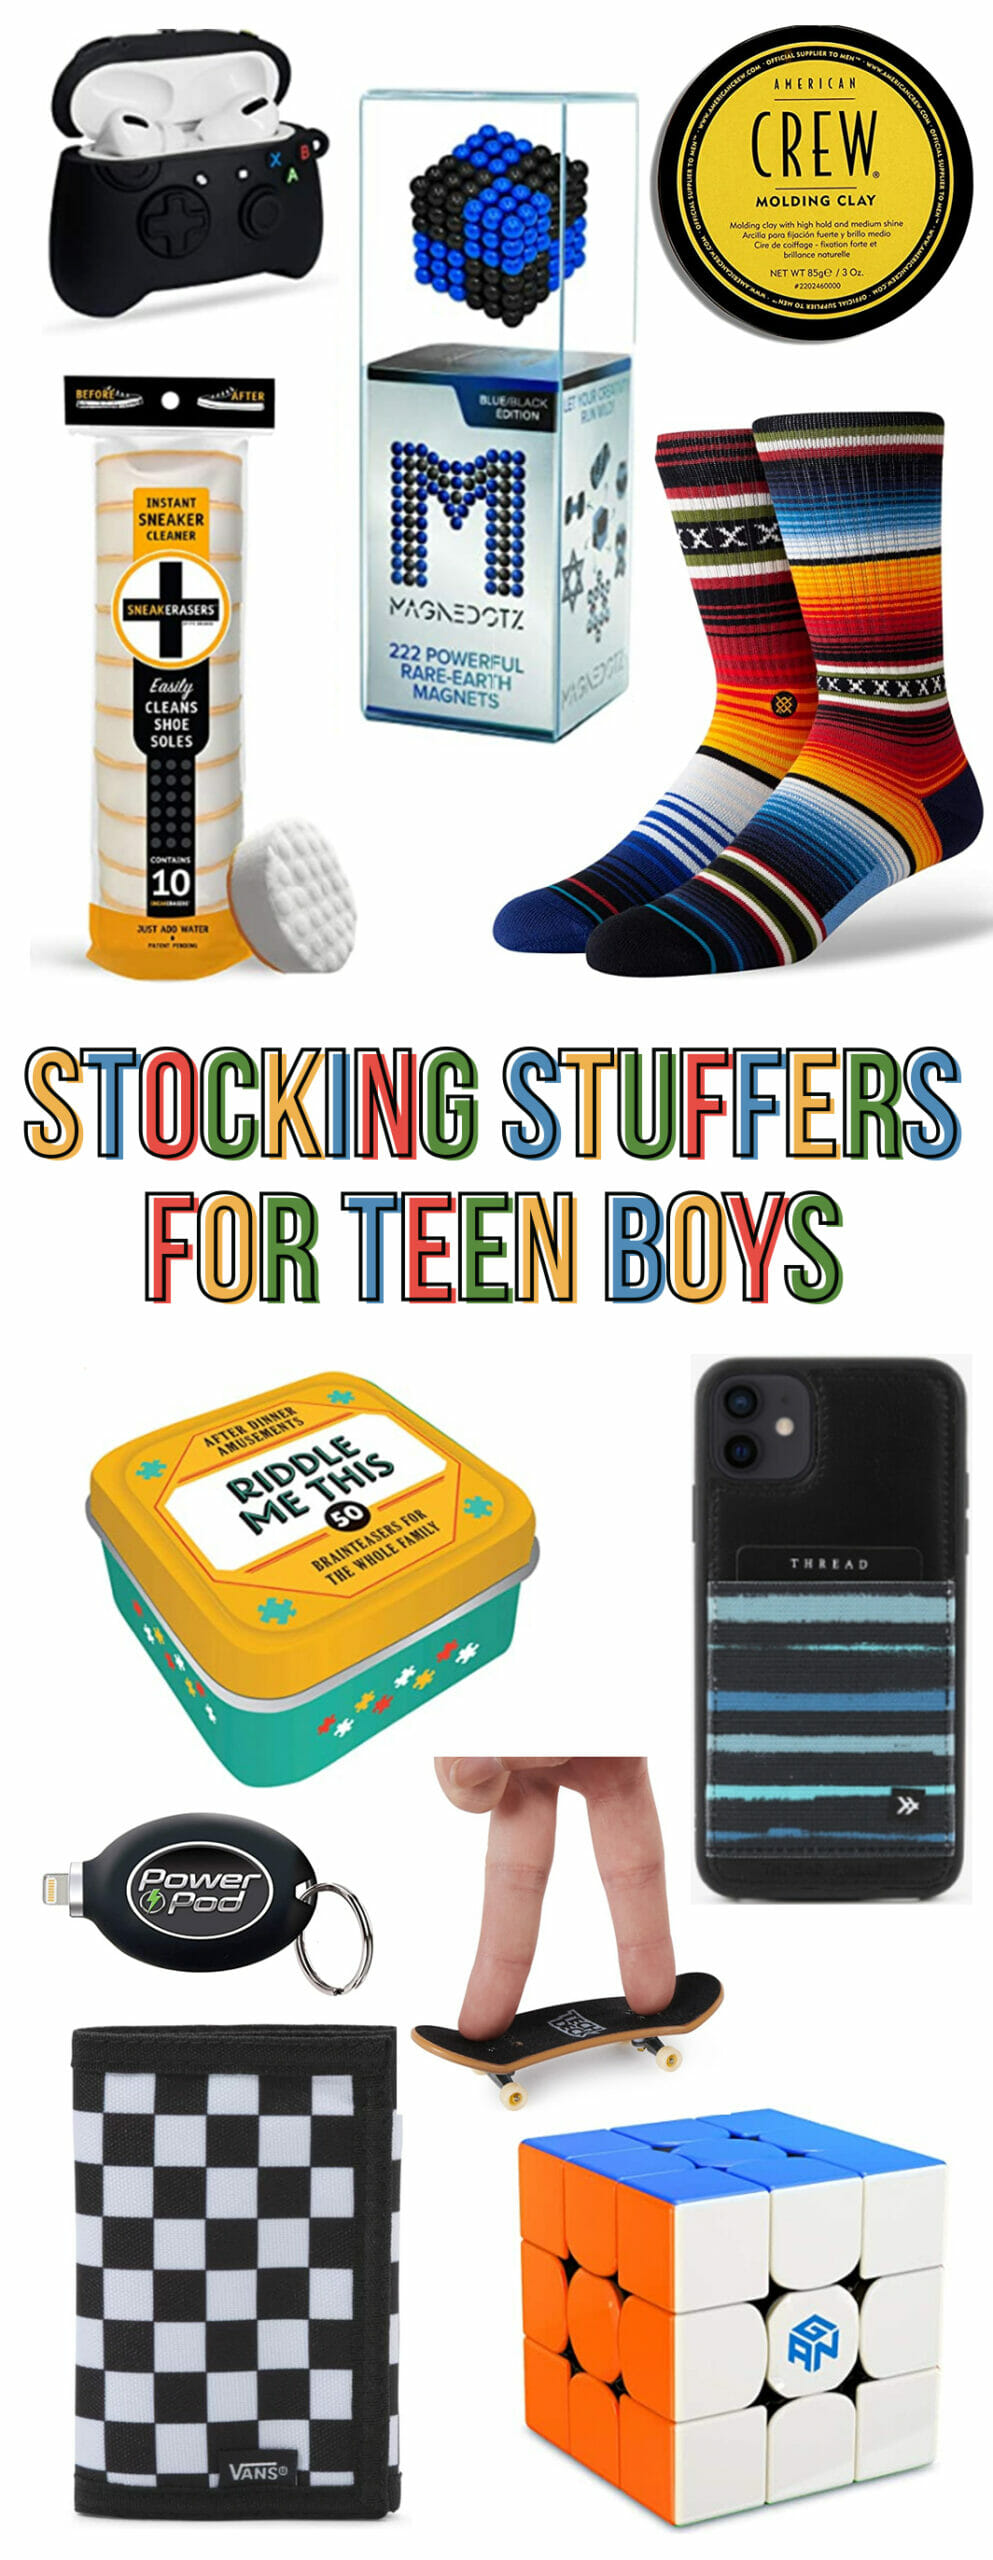 Stocking Stuffers for Teen Boys with gift ideas on white background.